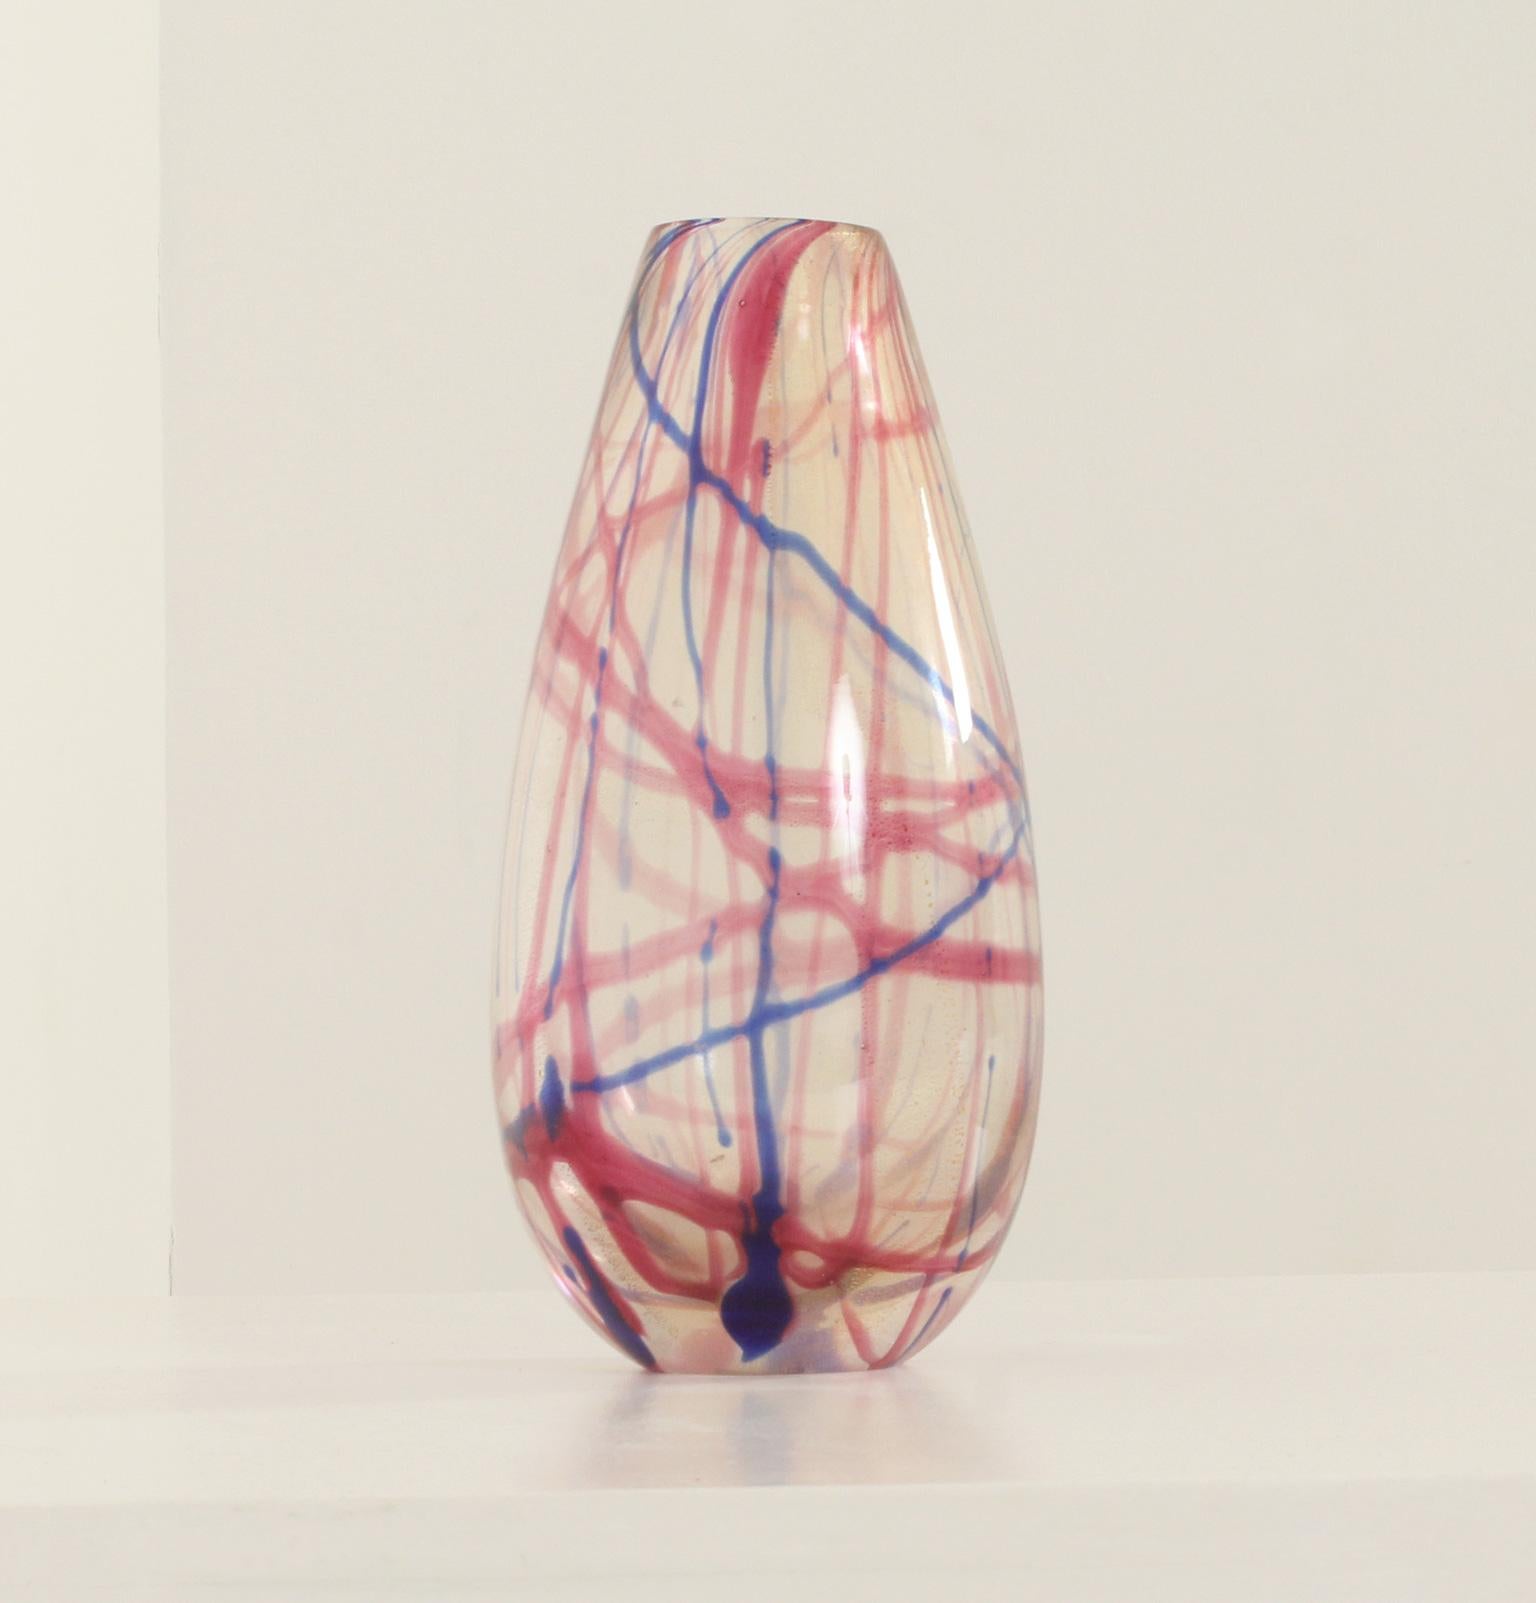 Murano Vase with colored lines from 1950's, Murano, Italy. Hand blown clear glass with gold inclusions and colored lines.